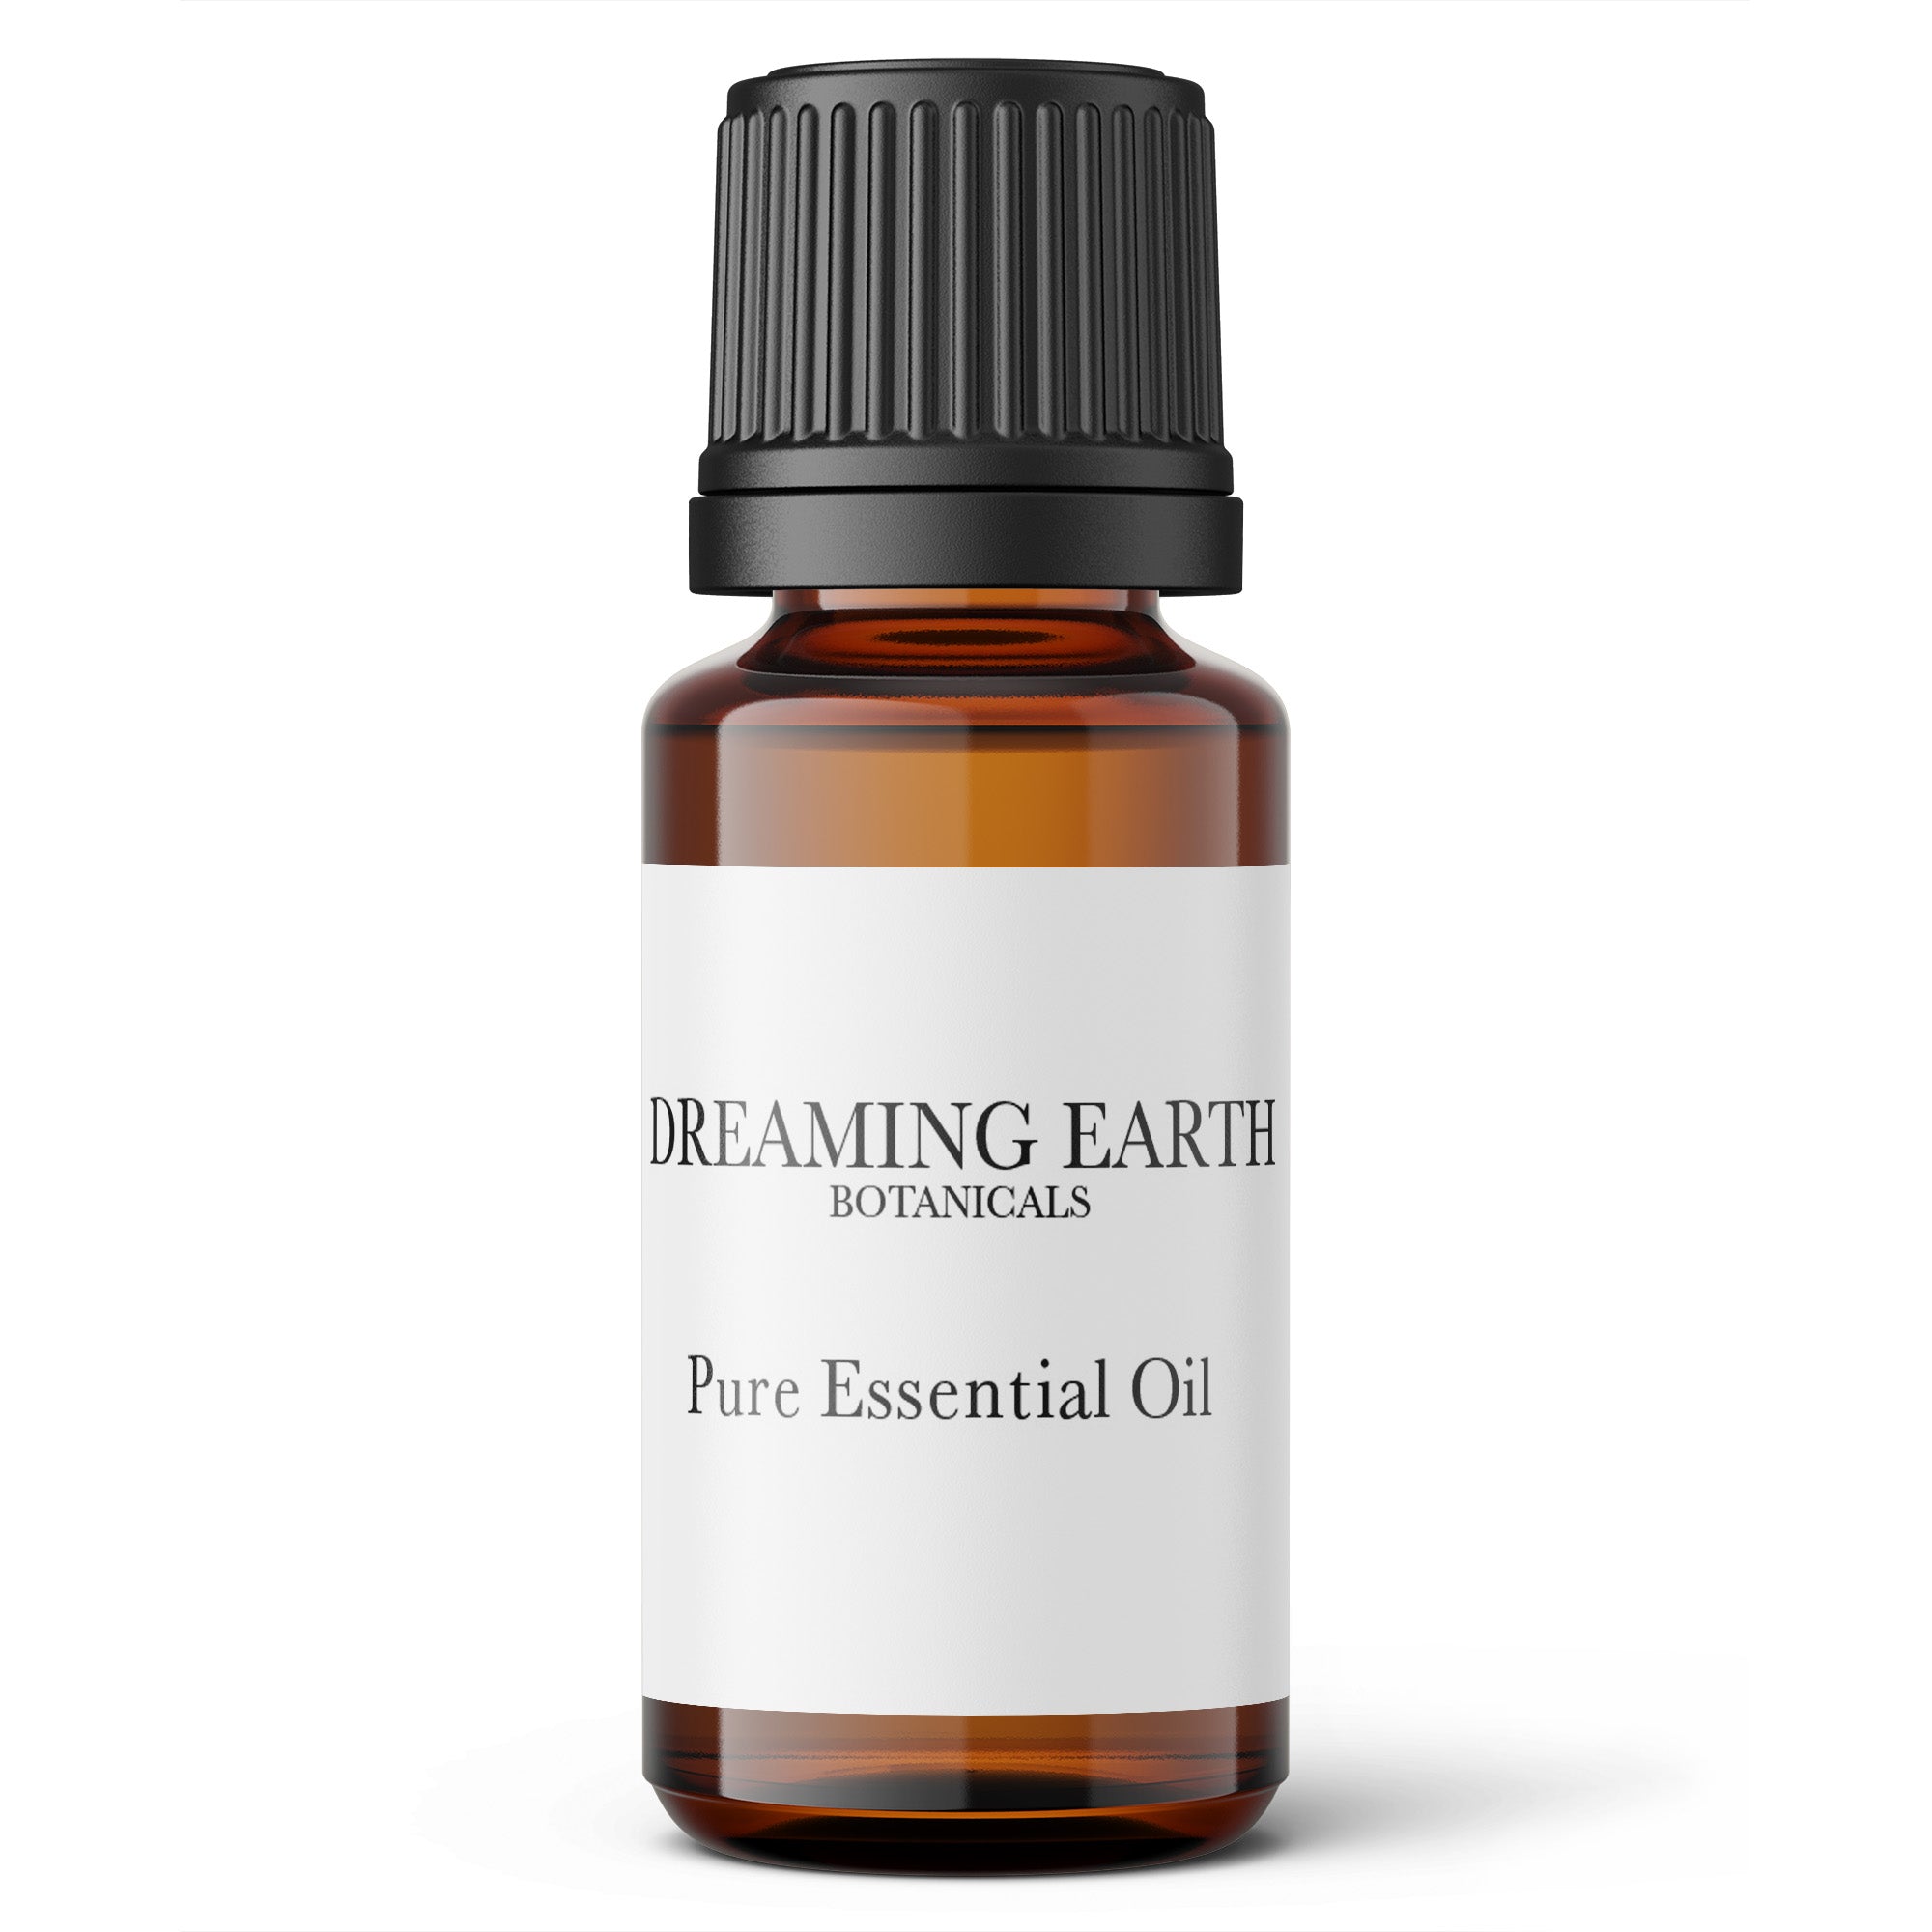 Load image into Gallery viewer, Rose Otto Essential Oil - Dreaming Earth Inc
